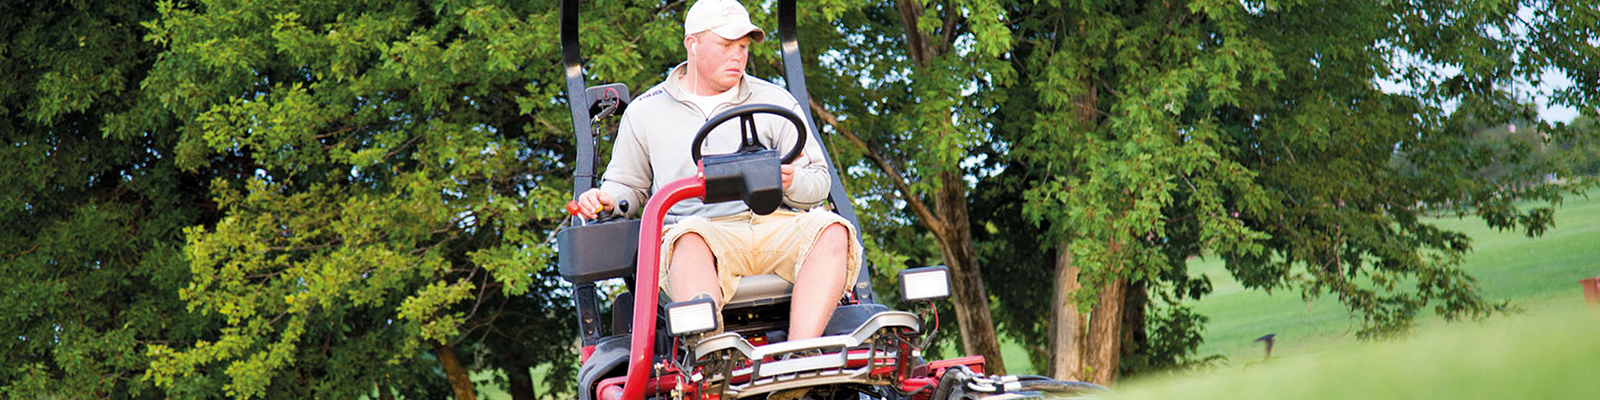 Man on large riding lawnmower, trimming grass on a golf course